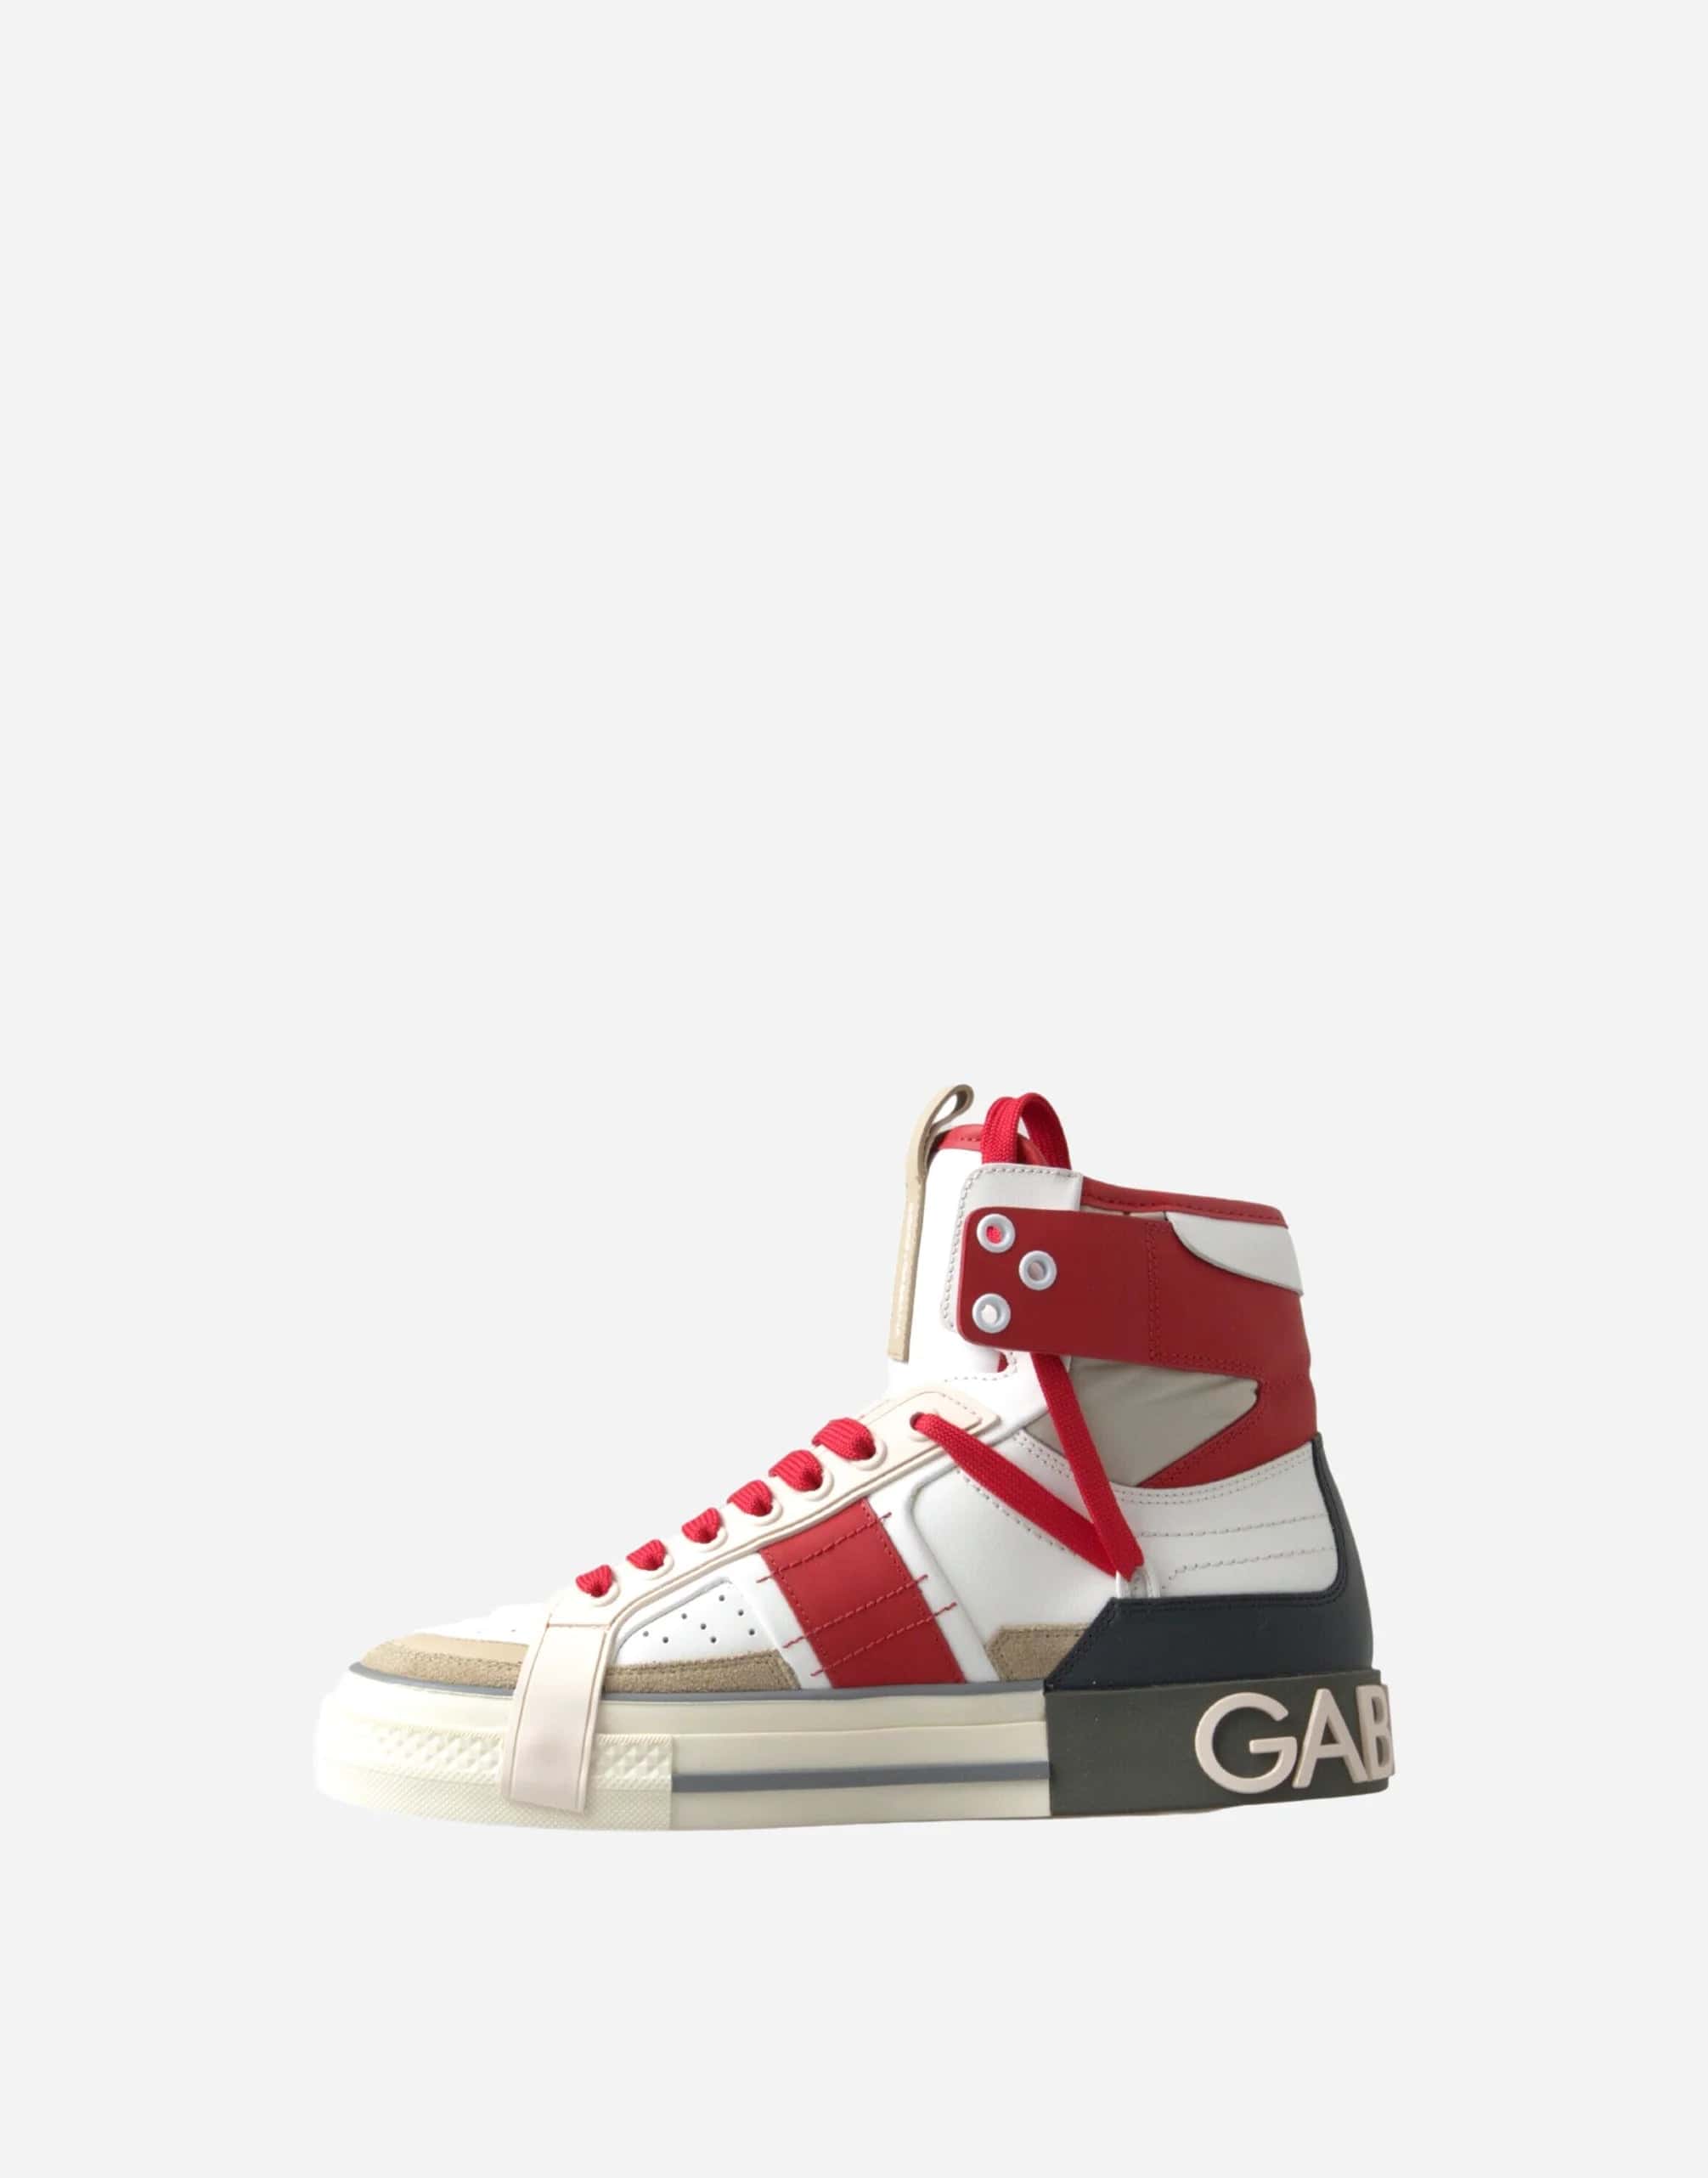 Dolce & Gabbana Multicolor Colorblock Leather High Top Sneakers Shoes (USE GATEWAY IMAGES DUE TO CREASE IN TONGUE)